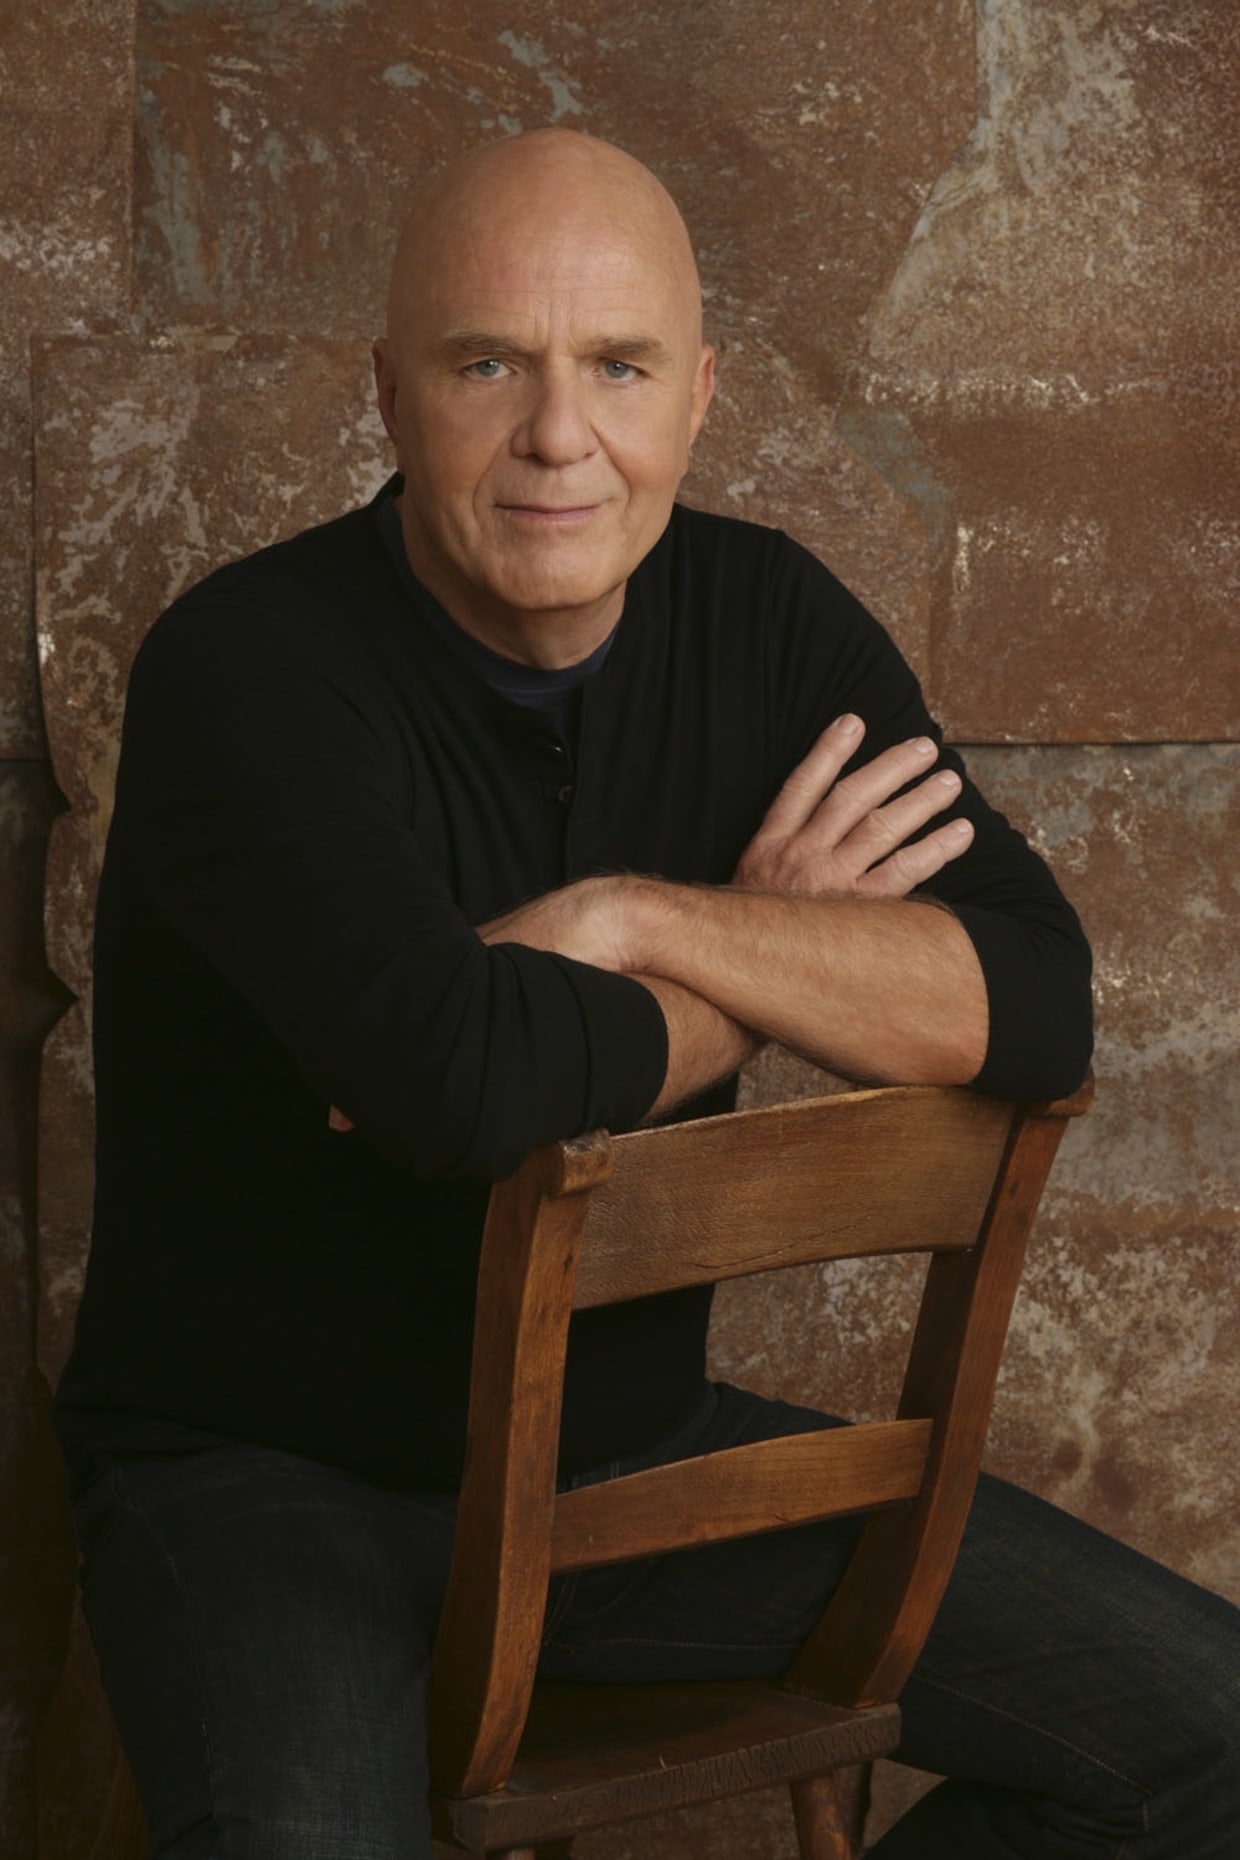 Self Help Pioneer Dr Wayne Dyer Dies At 75 Family And Publisher Say